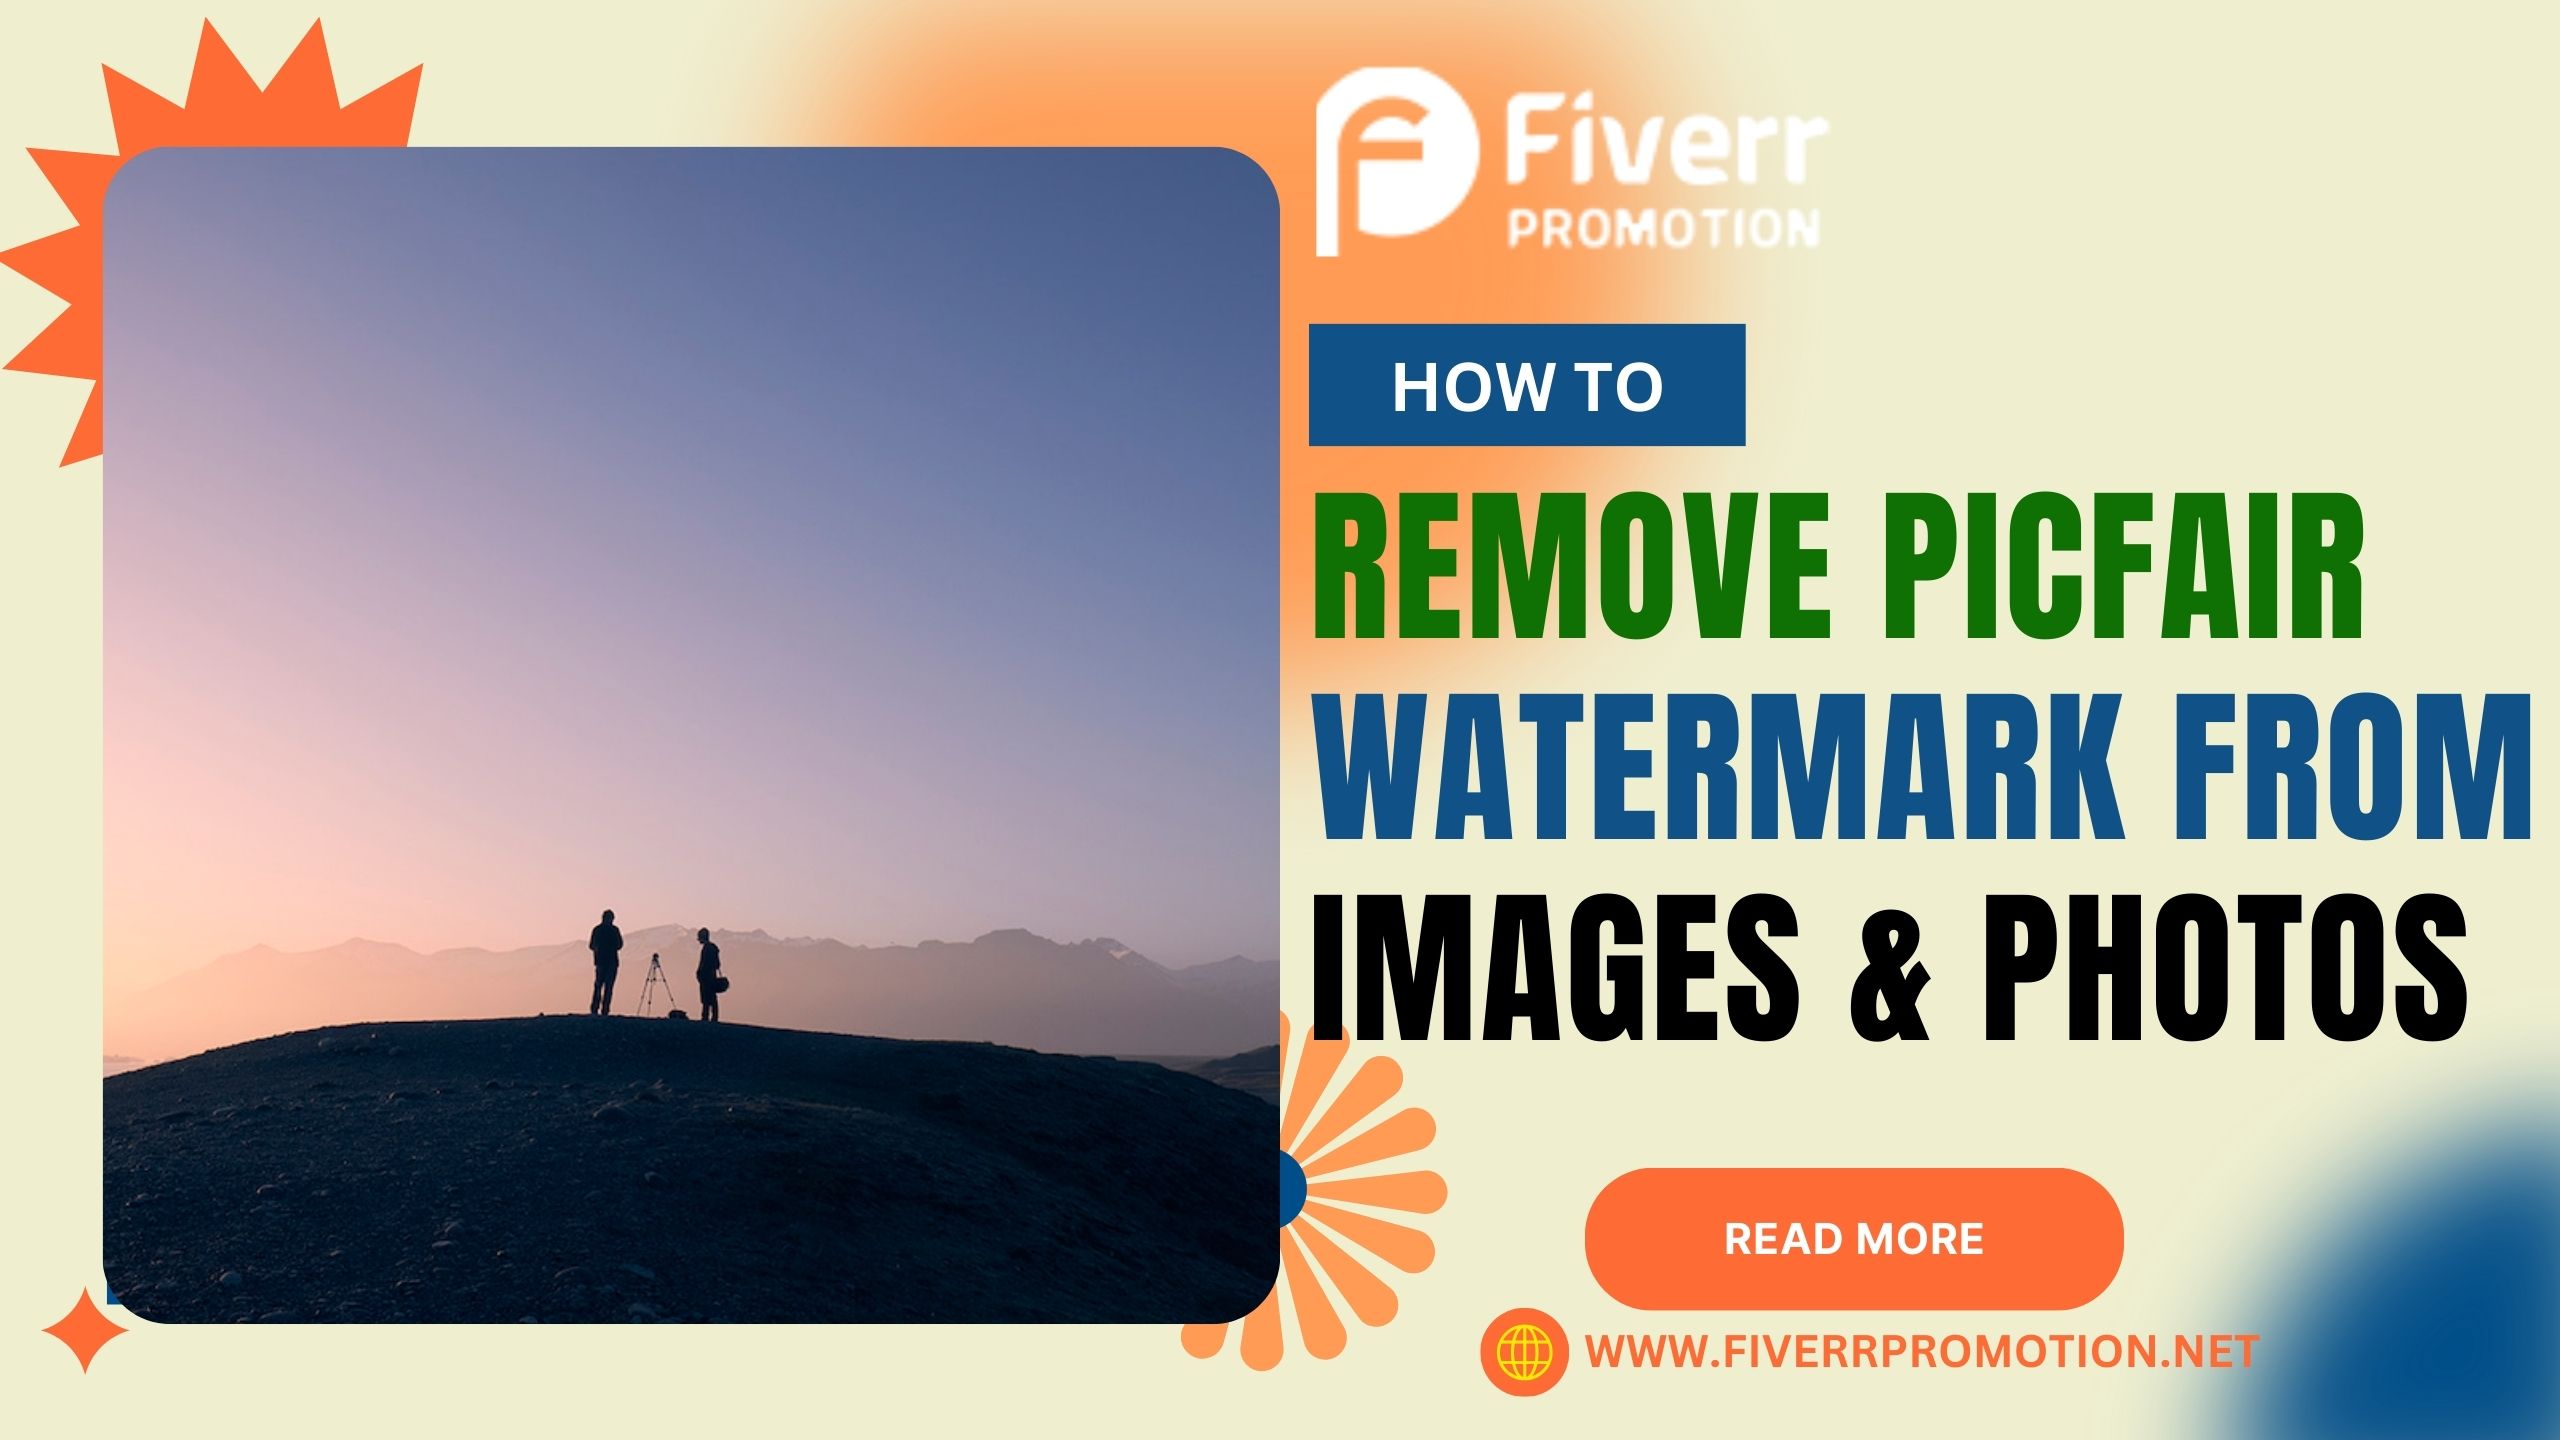 How to Remove Picfair Watermark from Images & Photos